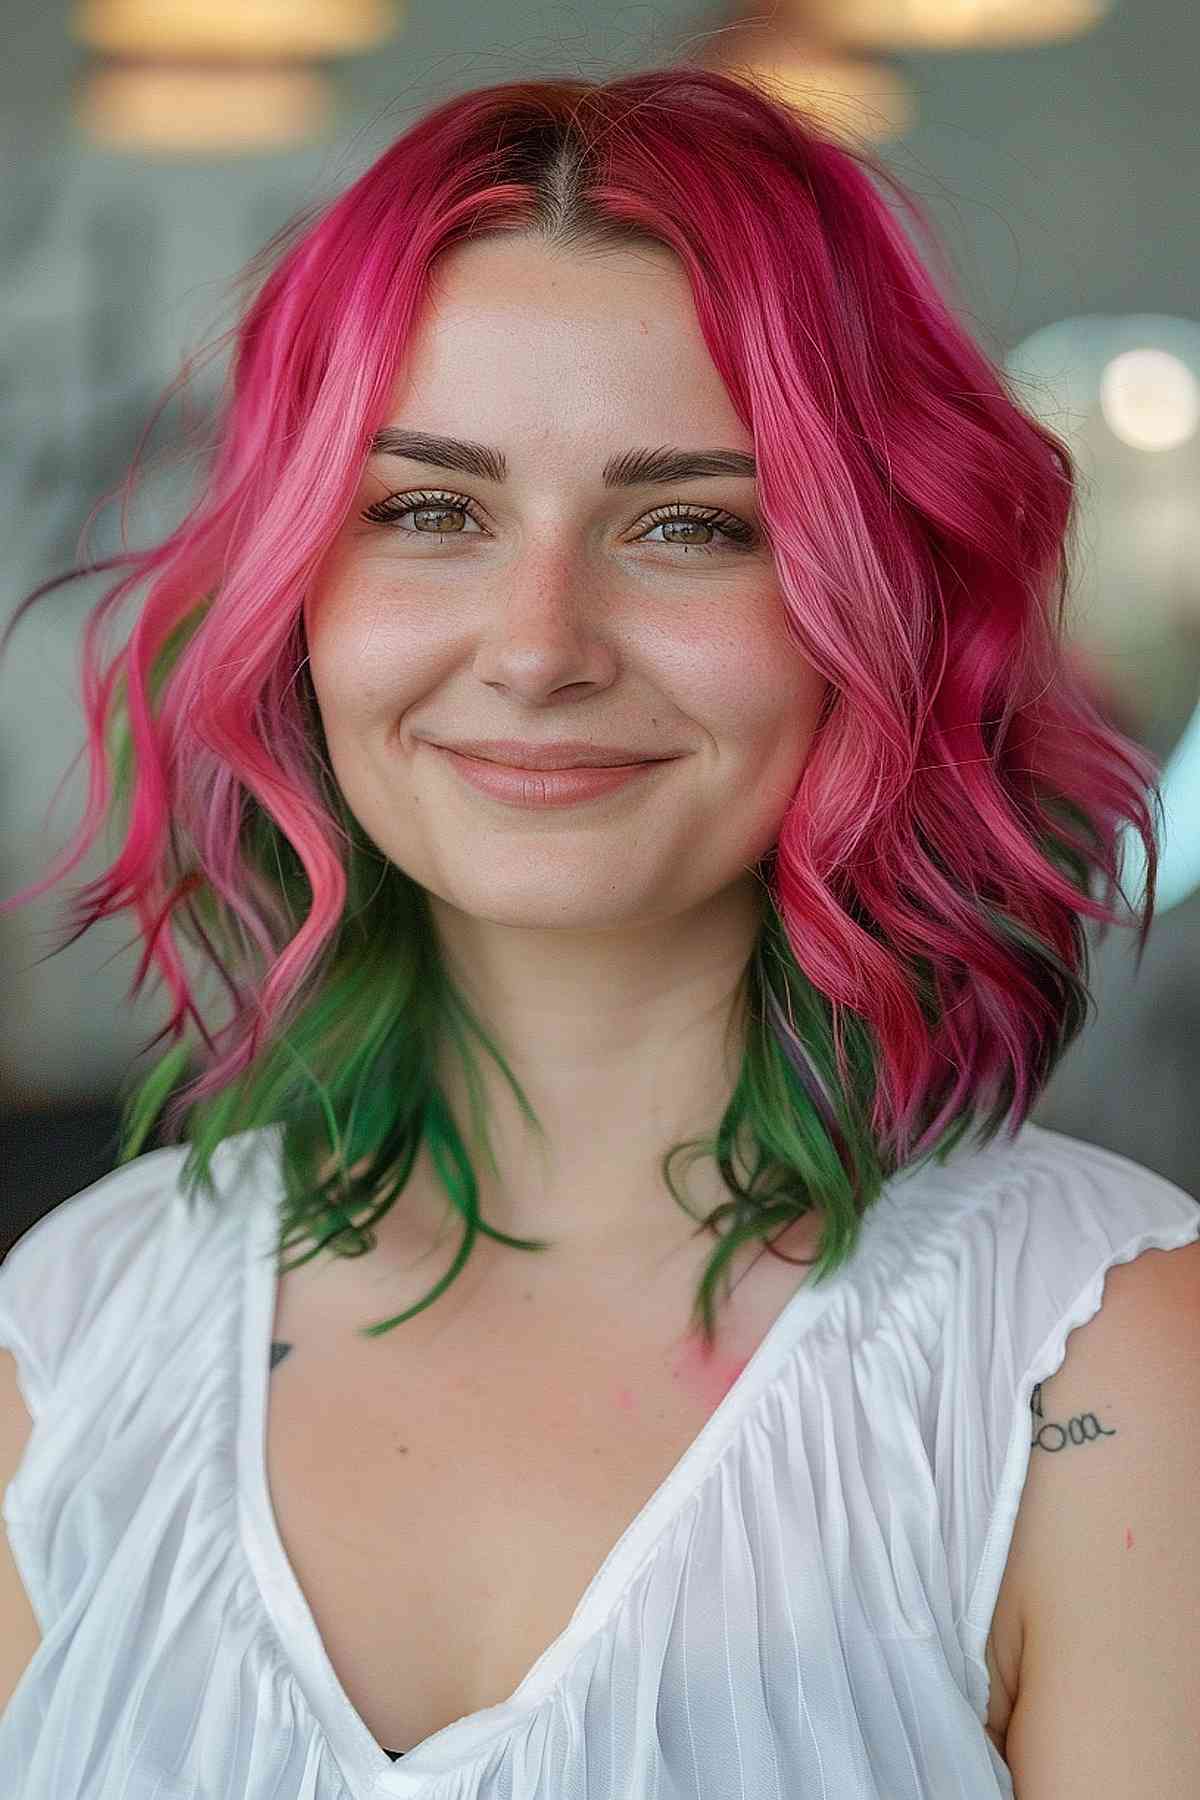 A young woman with a medium-length wavy bob, featuring a color transition from deep pink at the roots through brighter pink to green at the tips, framing her face with a bold watermelon palette.